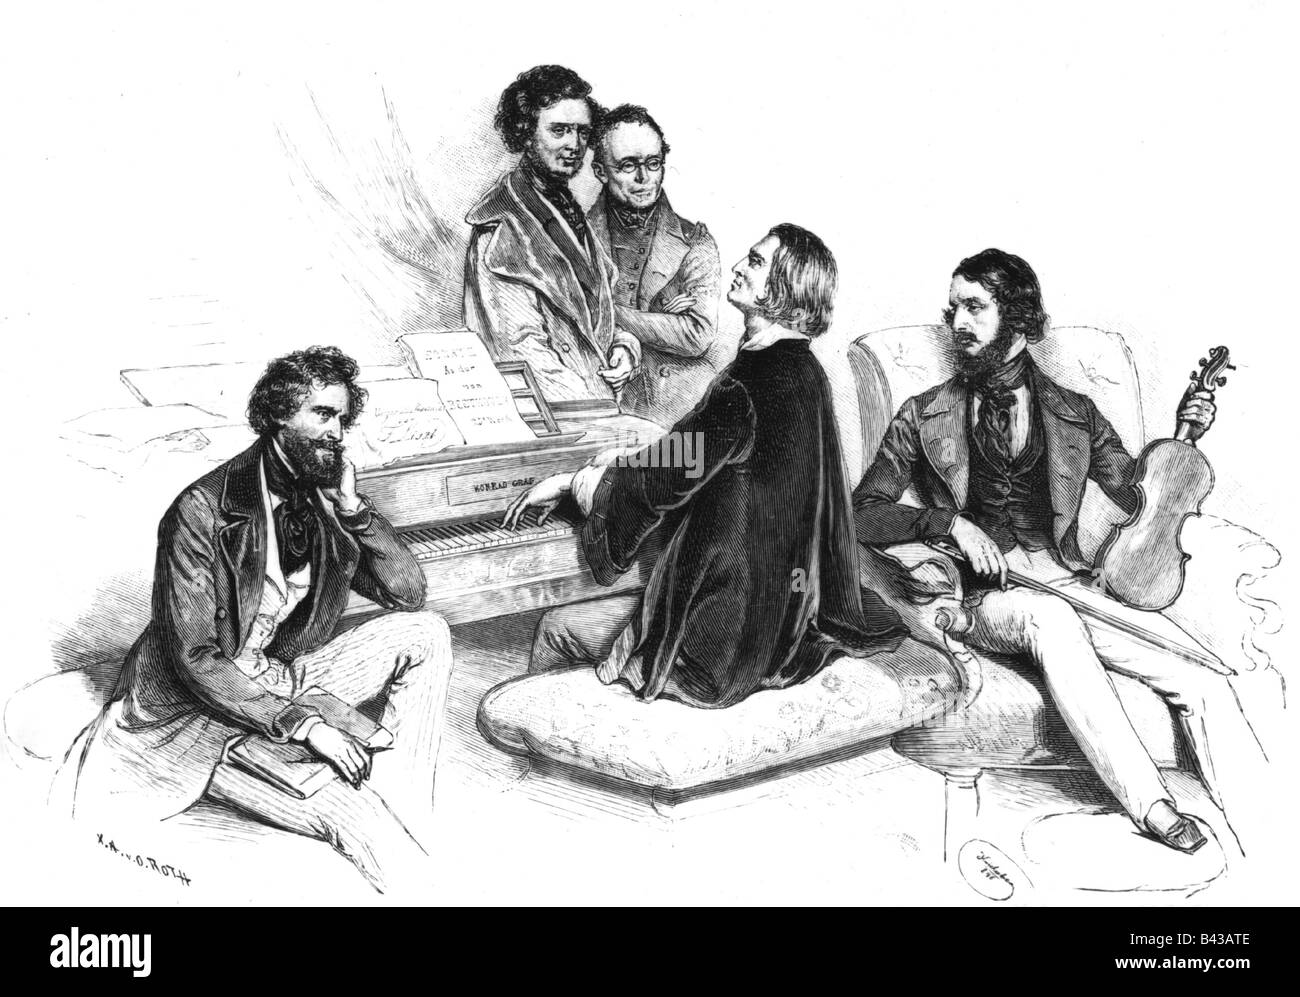 Liszt, Franz, 22.10.1811 - 31.7.1886, Hungarian composer and musician, matinée with Joseph Kriehuber, Hector Berlioz, Carl Czerny and Heinrich Wilhelm Ernst, lithograph by Kriehuber, Vienna, 1846, , Stock Photo